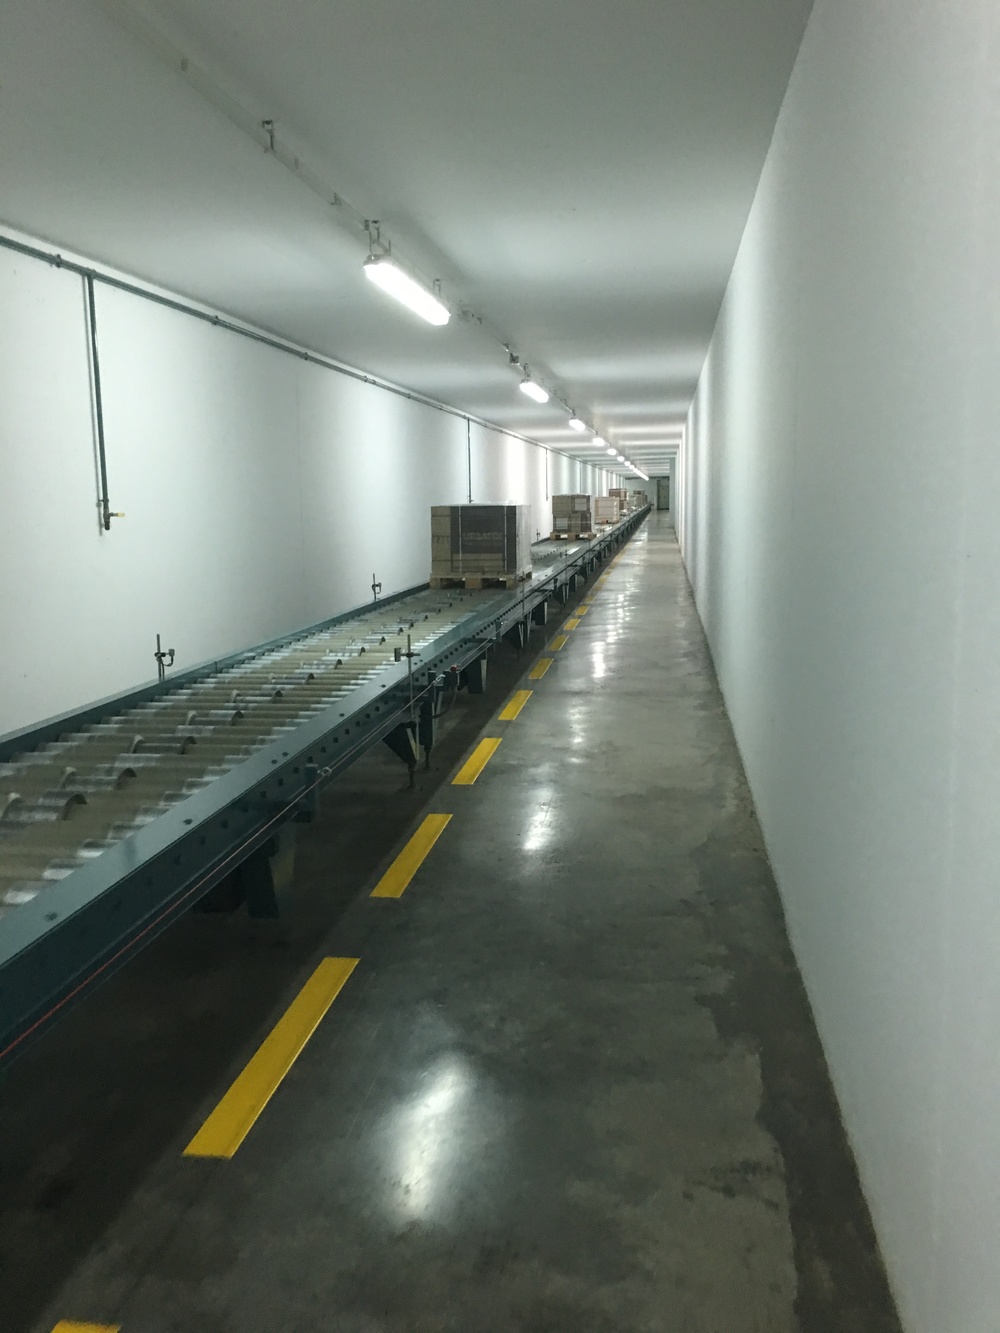 The tunnel leading the packaged tiles to the warehouse